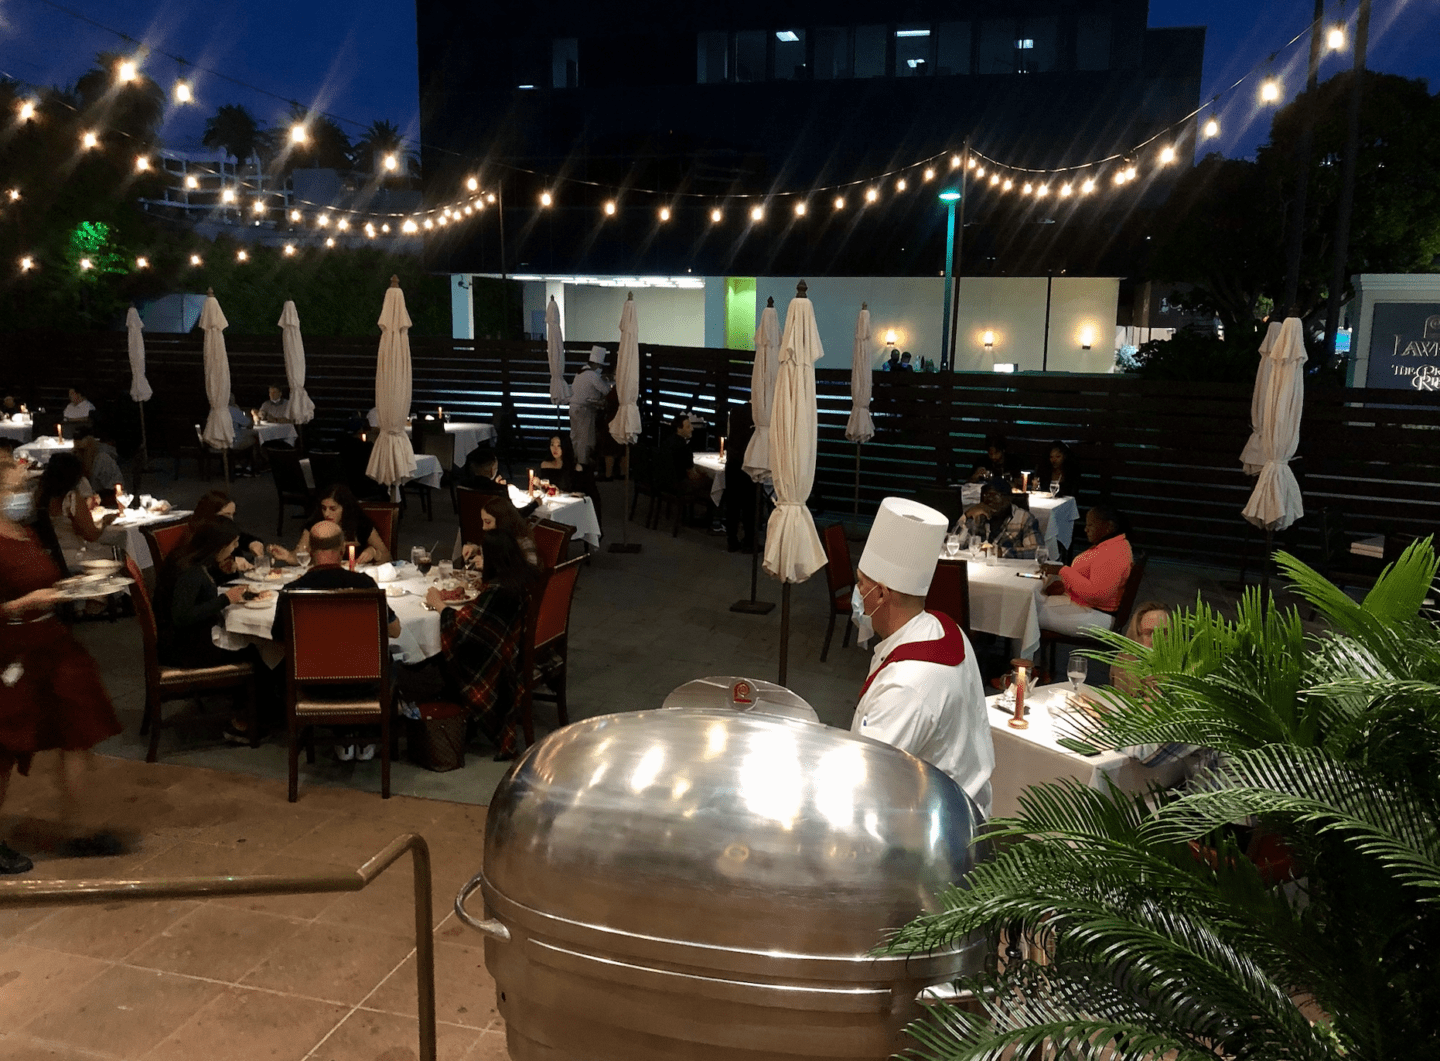 Outdoor dining in Los Angeles - Lawry's Beverly Hills